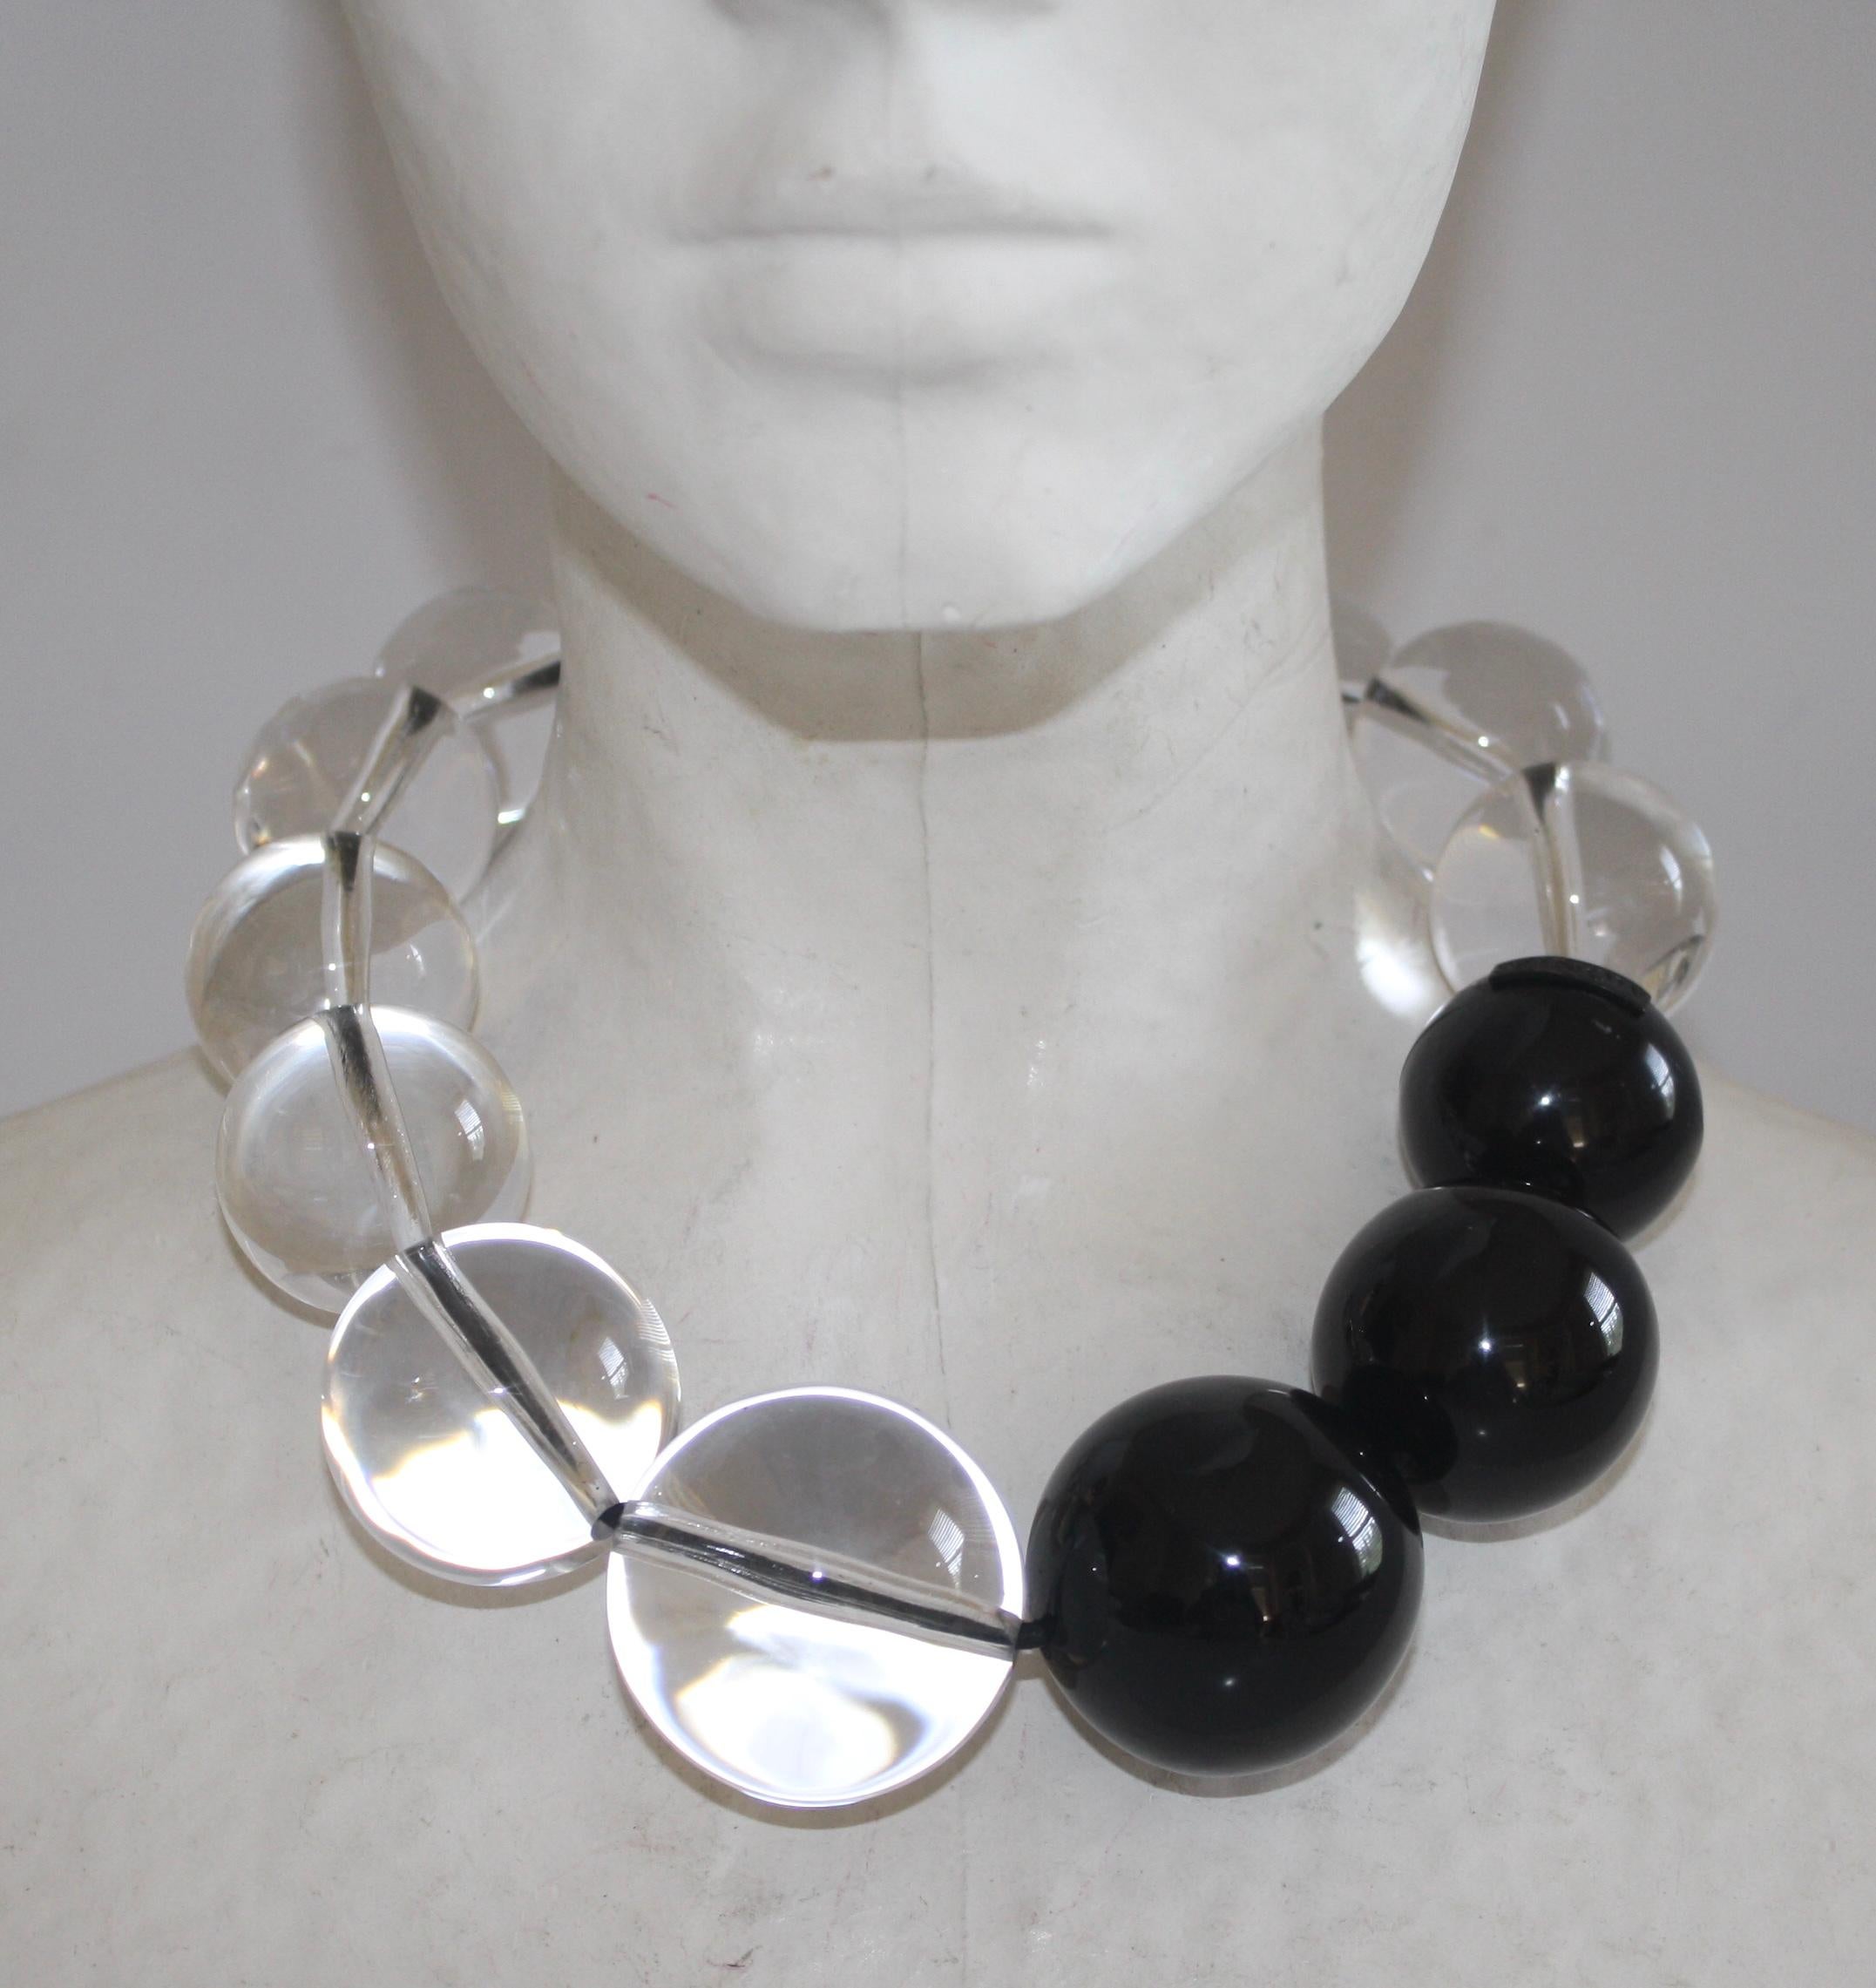 Monies Acrylic, Polyester, and Leather Necklace with magnetic closure. 